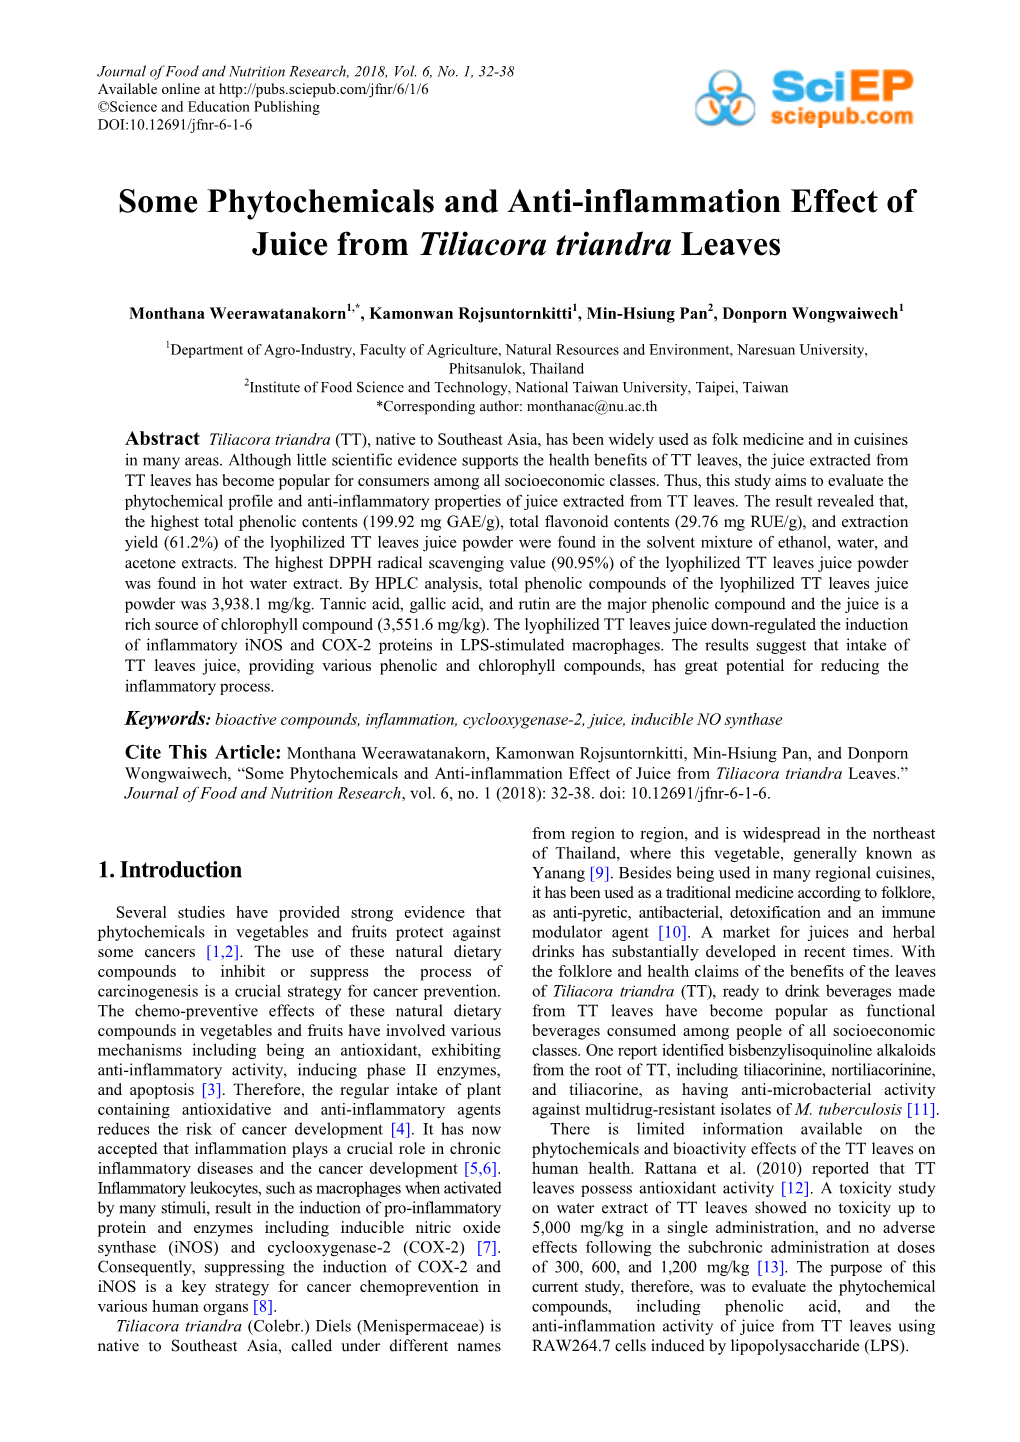 Some Phytochemicals and Anti-Inflammation Effect of Juice from Tiliacora Triandra Leaves